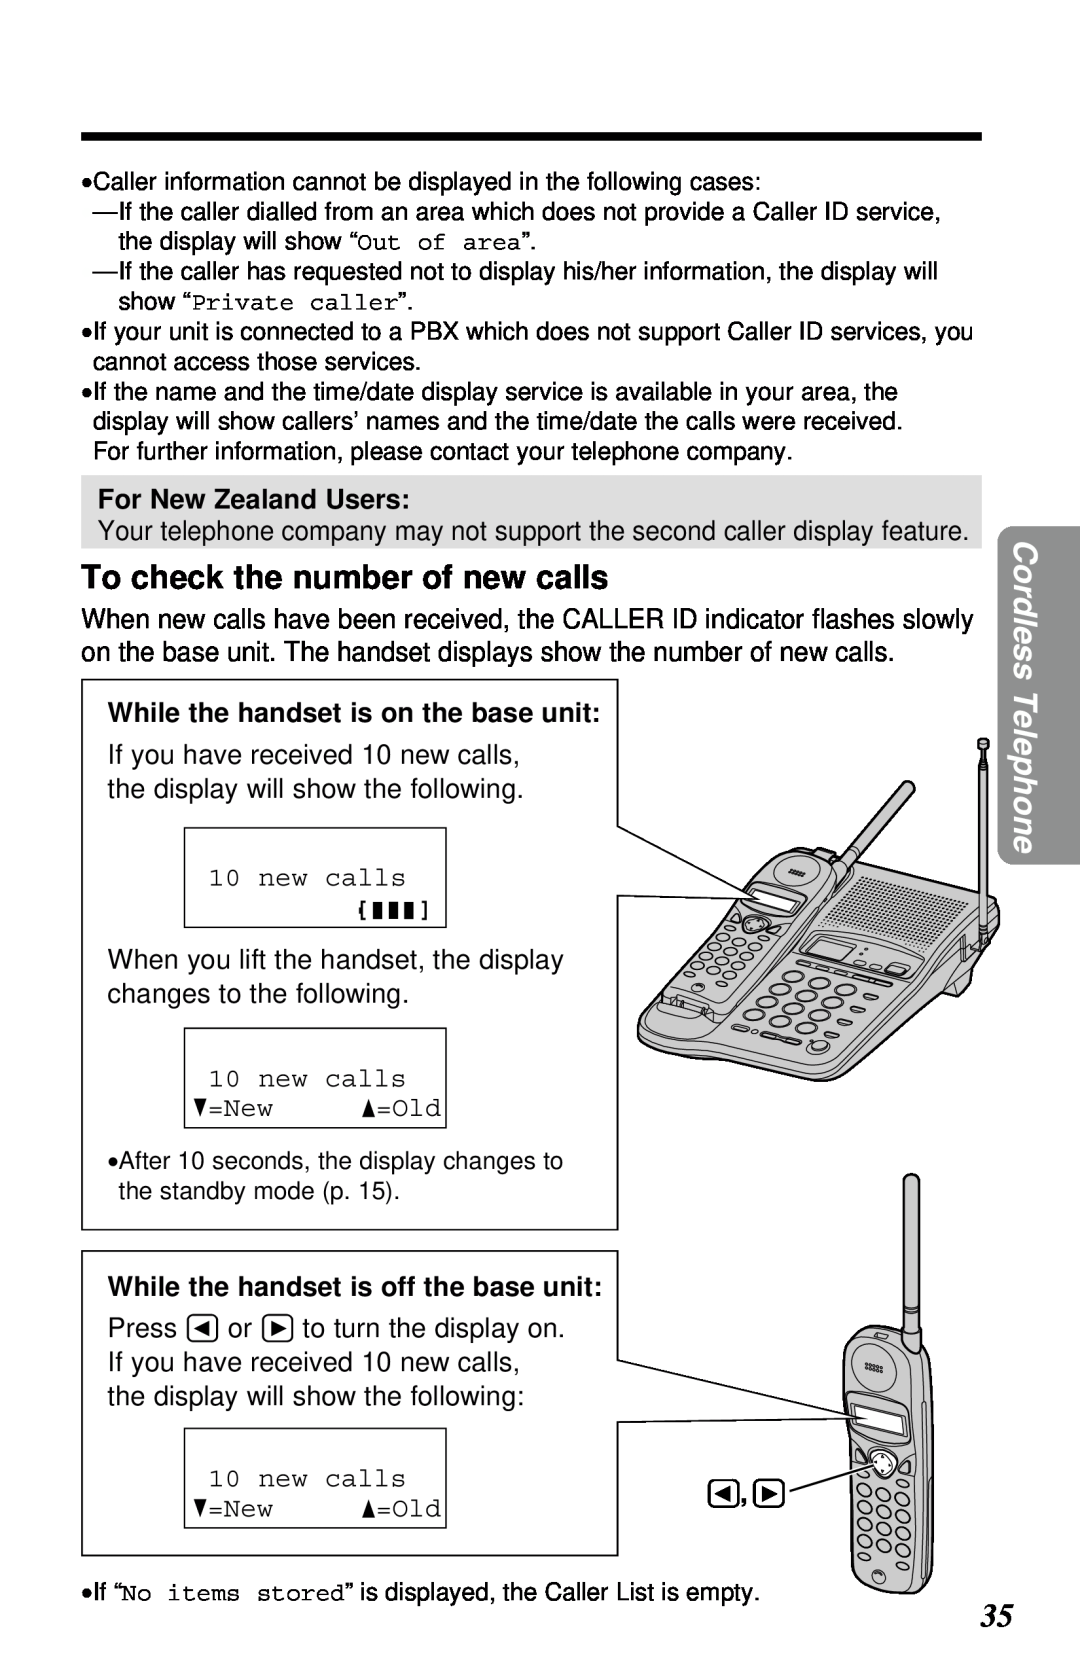 Panasonic KX-TC1230NZW, KX-TC1230ALW To check the number of new calls, For New Zealand Users, new calls G=New F=Old 